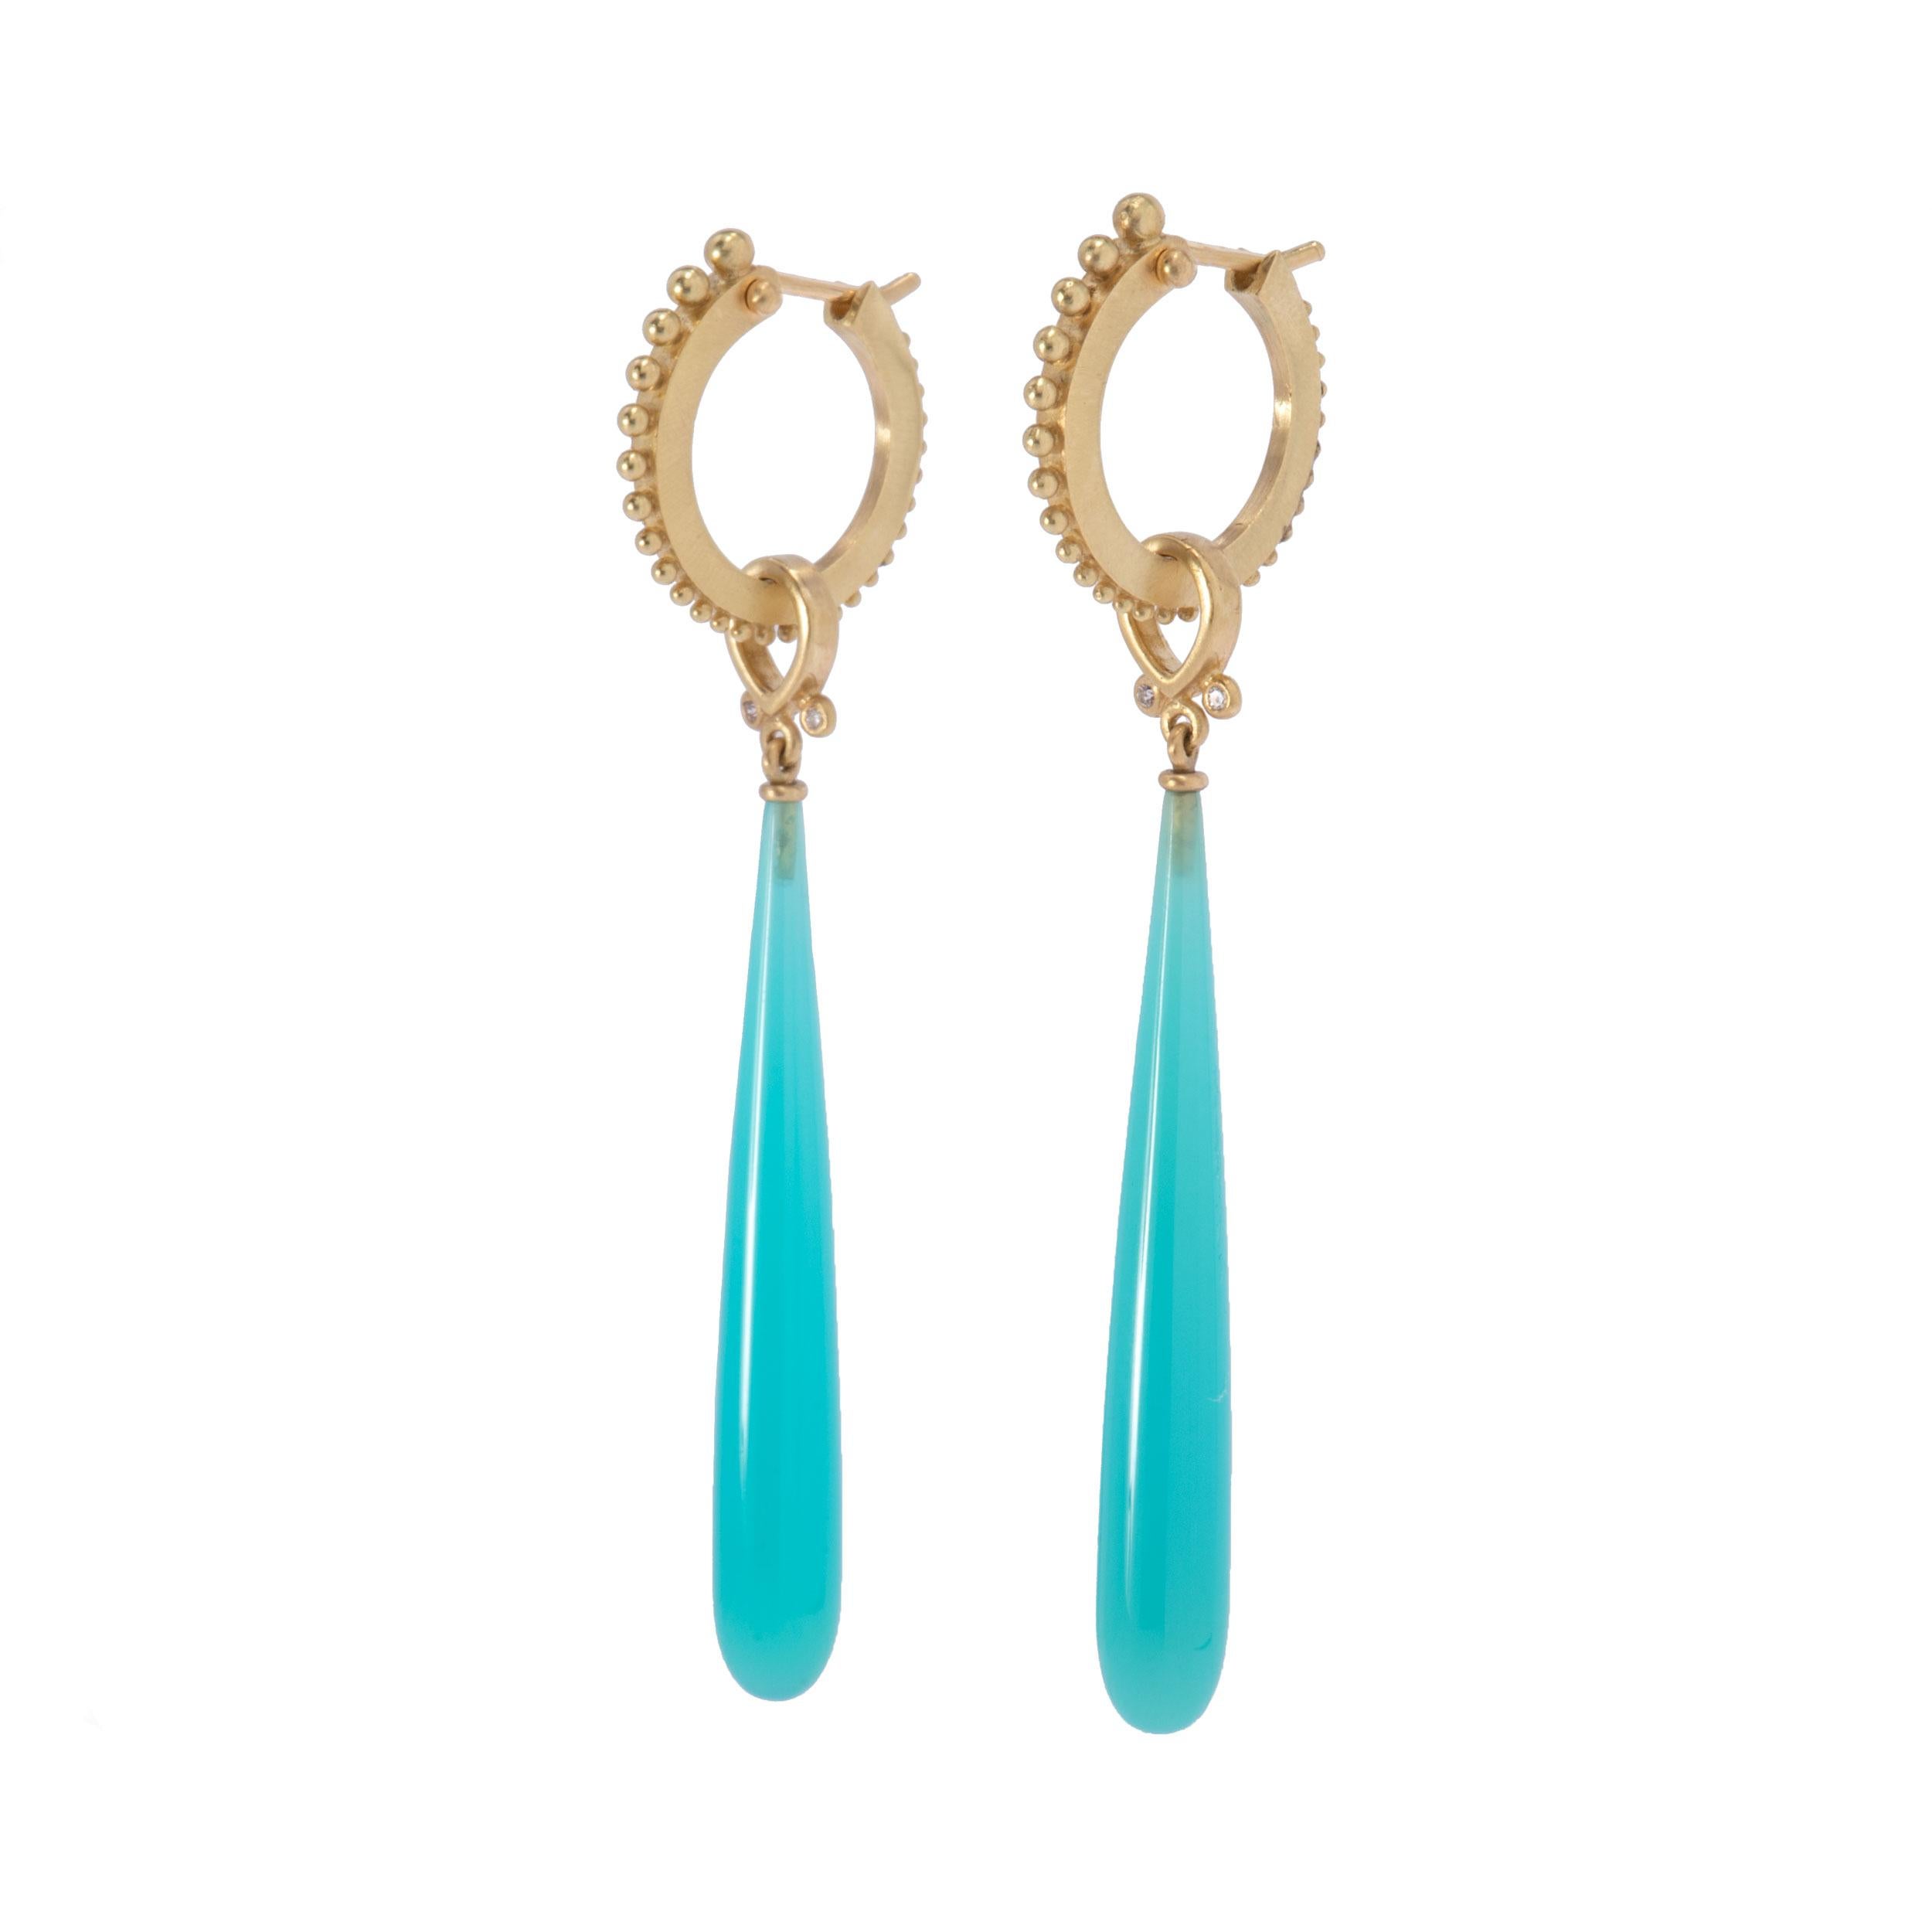 Long wands of Turquoise Blue Laguna Agate hang from 18 karat gold anjou tops set with .04ctw diamonds. Juicy, slightly milky color in turquoise blue wands swing from looped anjou tops set with 2 round white diamonds. Hung from large narrow beaded